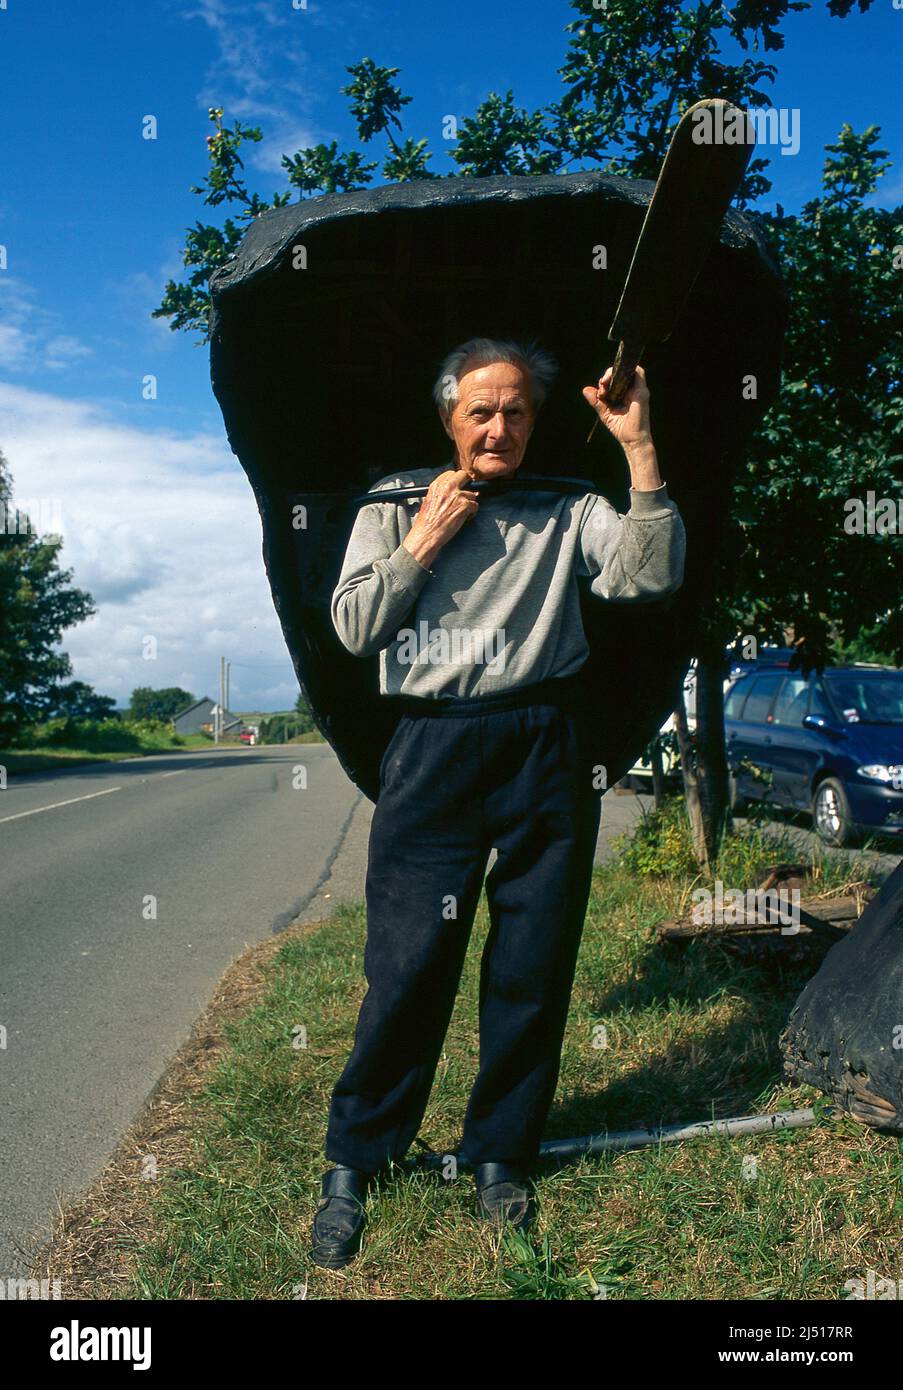 Bernard Thomas, Coracle Maker, LLechryd, near Cardigan, Wales. With a coracle he recently made. Stock Photo